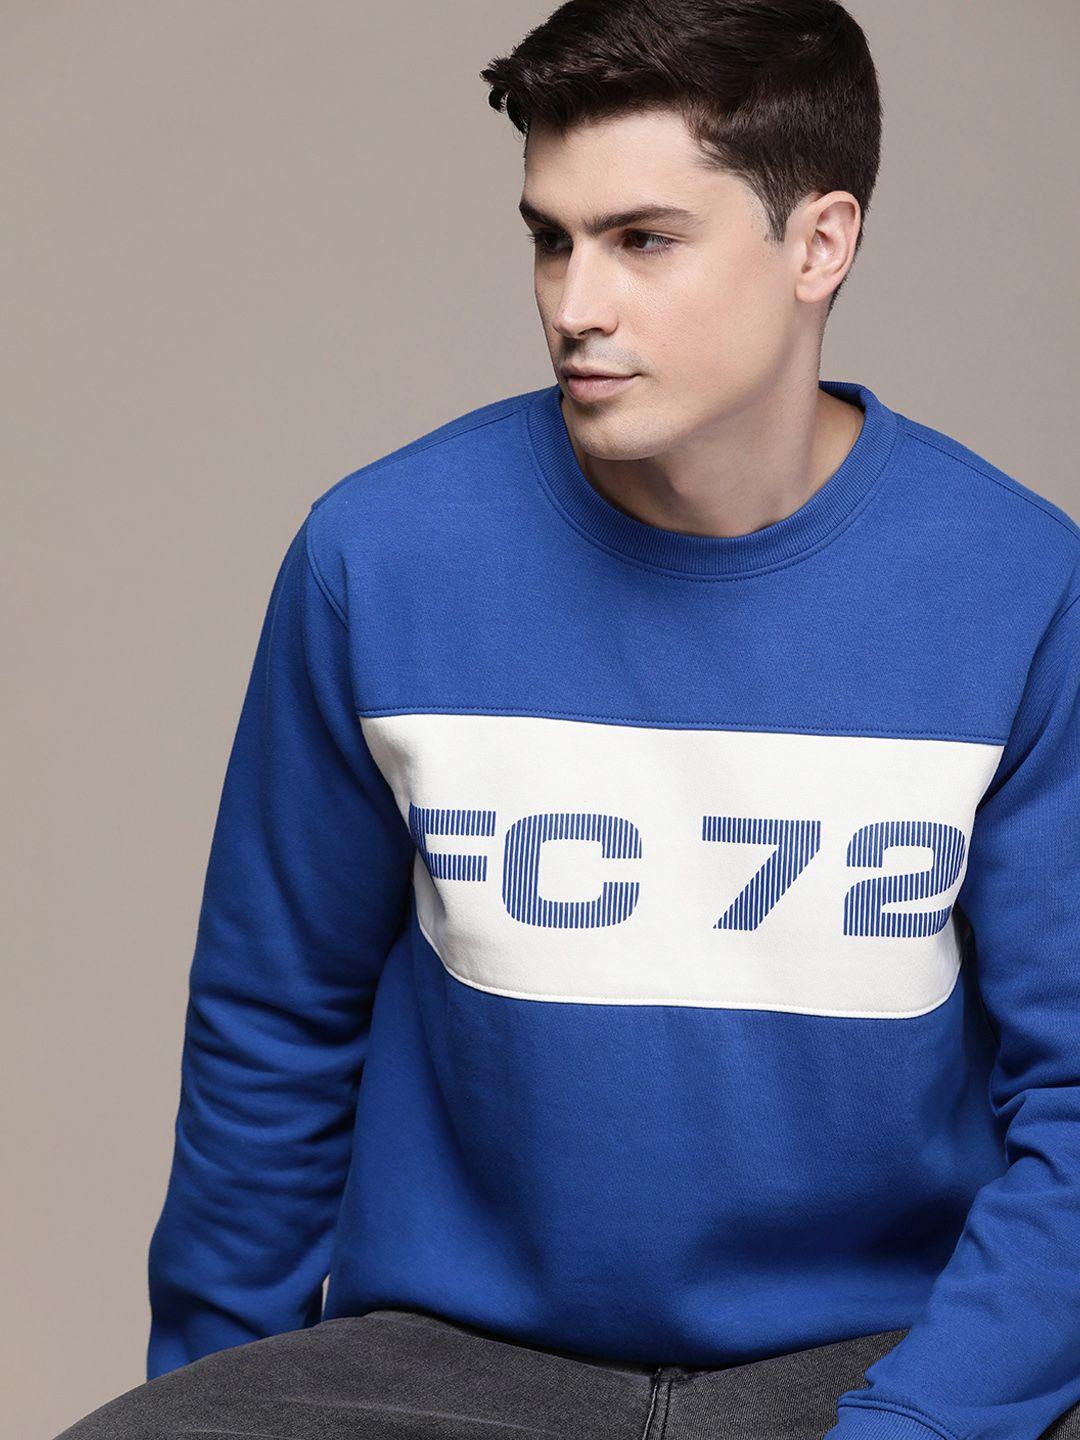 french connection graphic printed & colourblocked sweatshirt